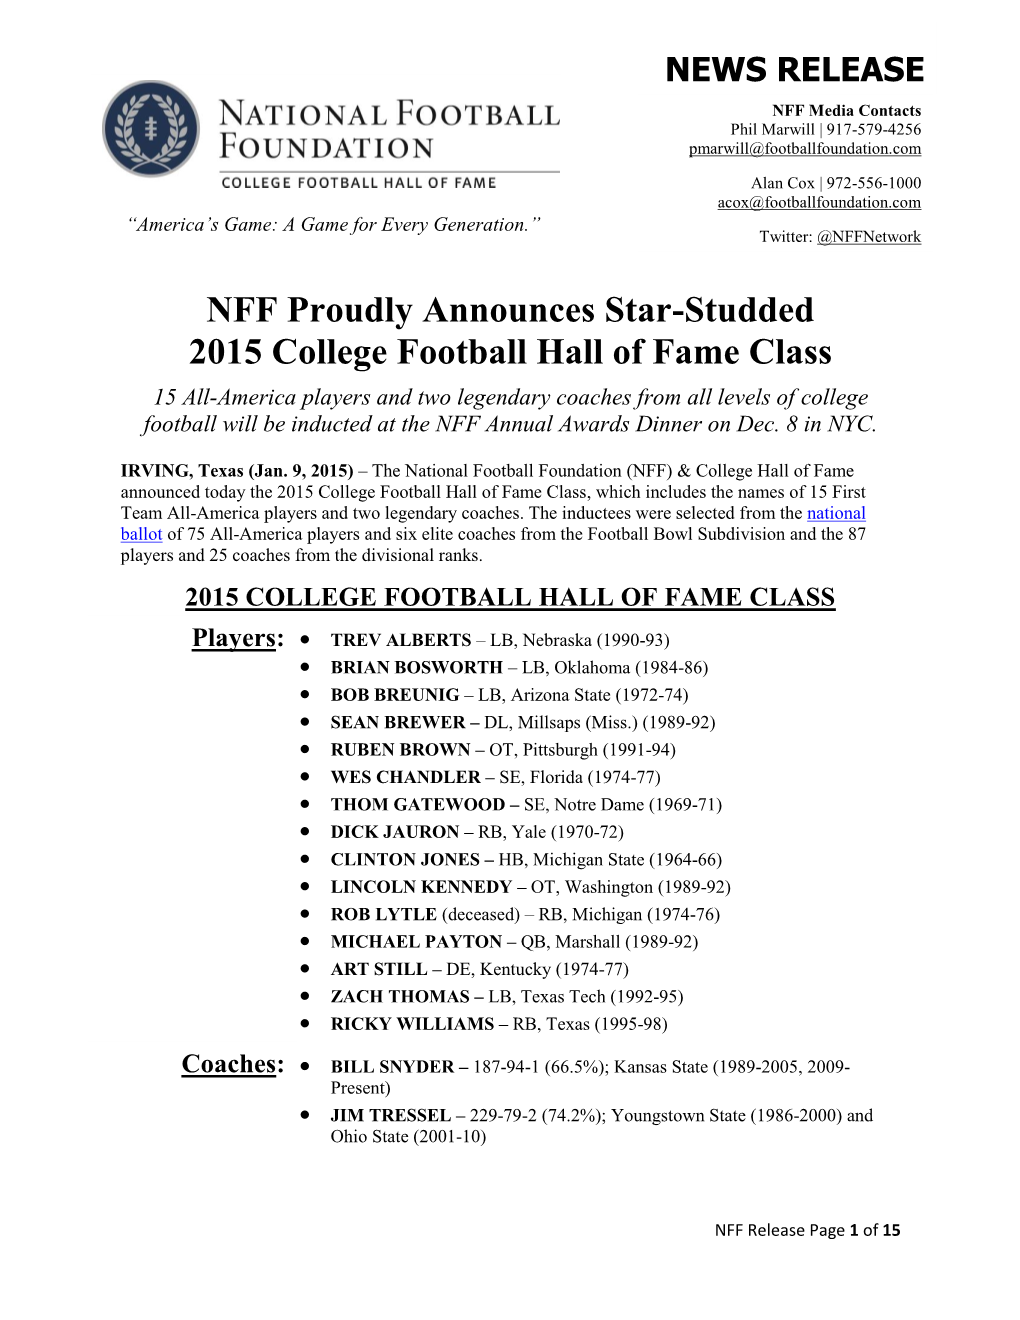 NFF Proudly Announces Star-Studded 2015 College Football Hall of Fame Class